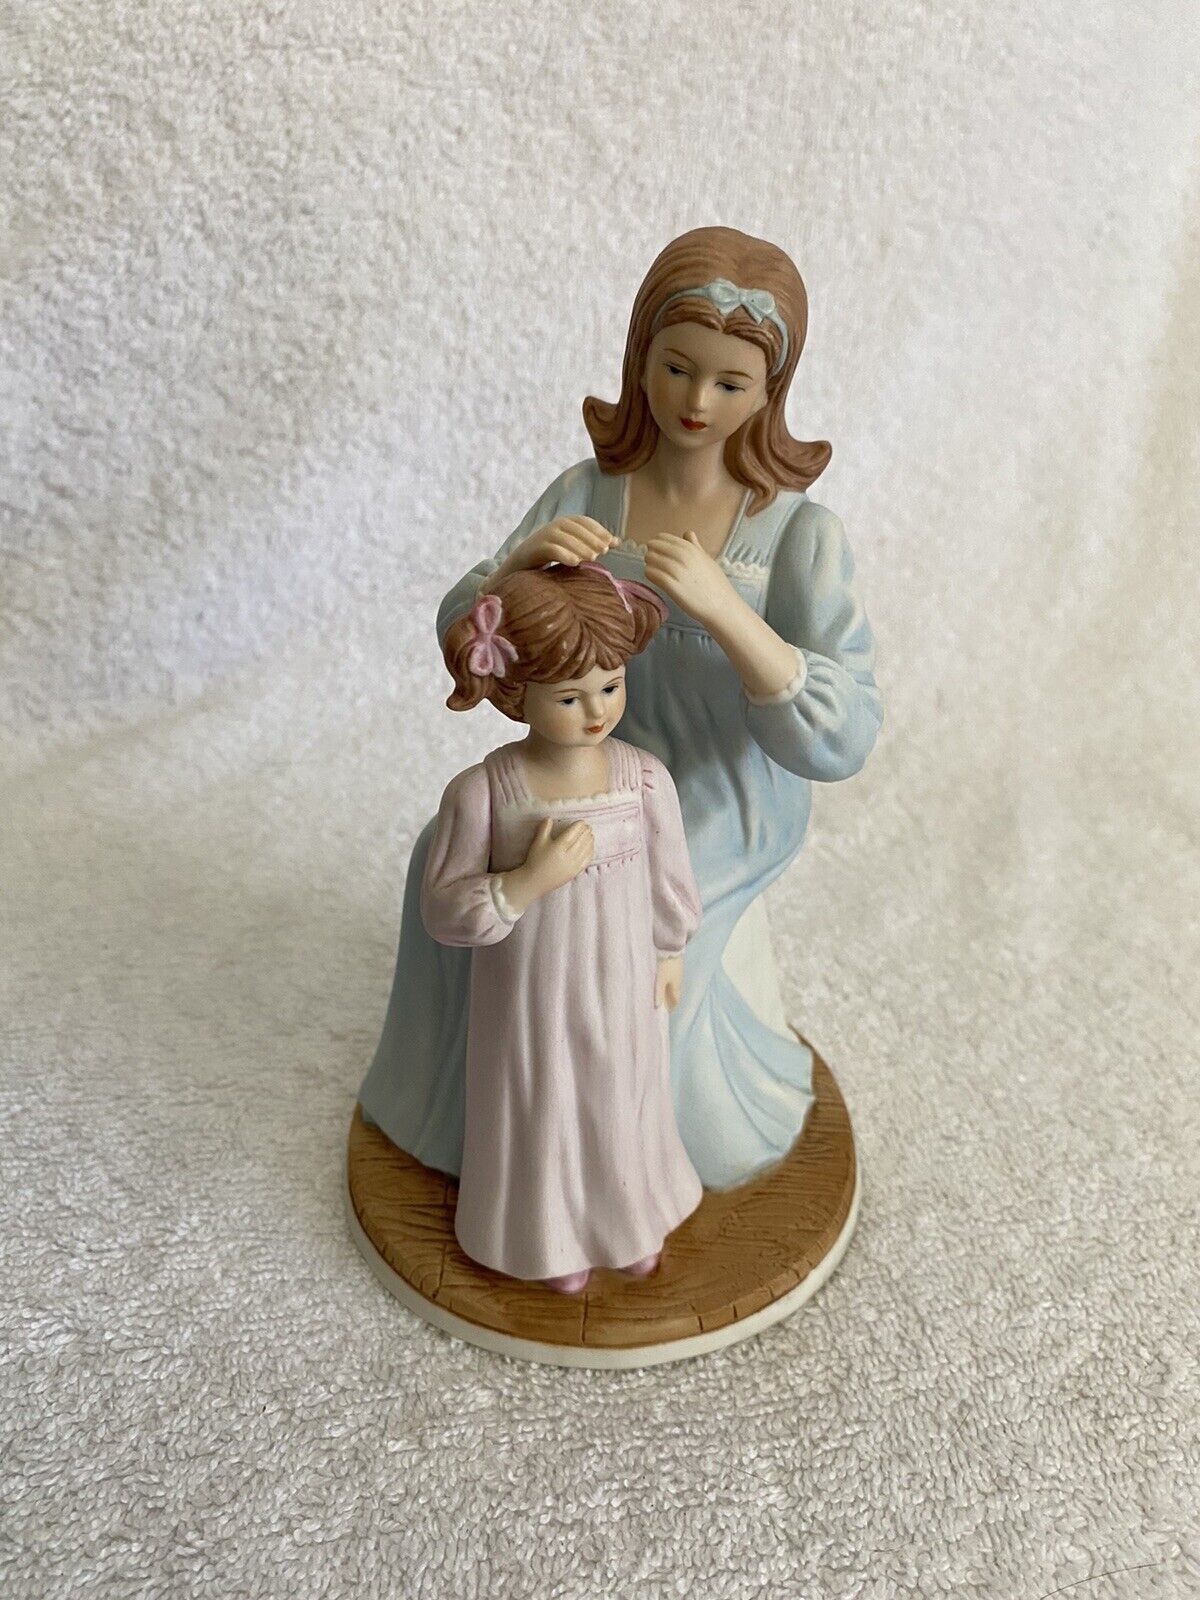 1986 Heritage House “My Mother’s Love” Mother & Daughter 6.5” Porcelain Figurine - $12.95